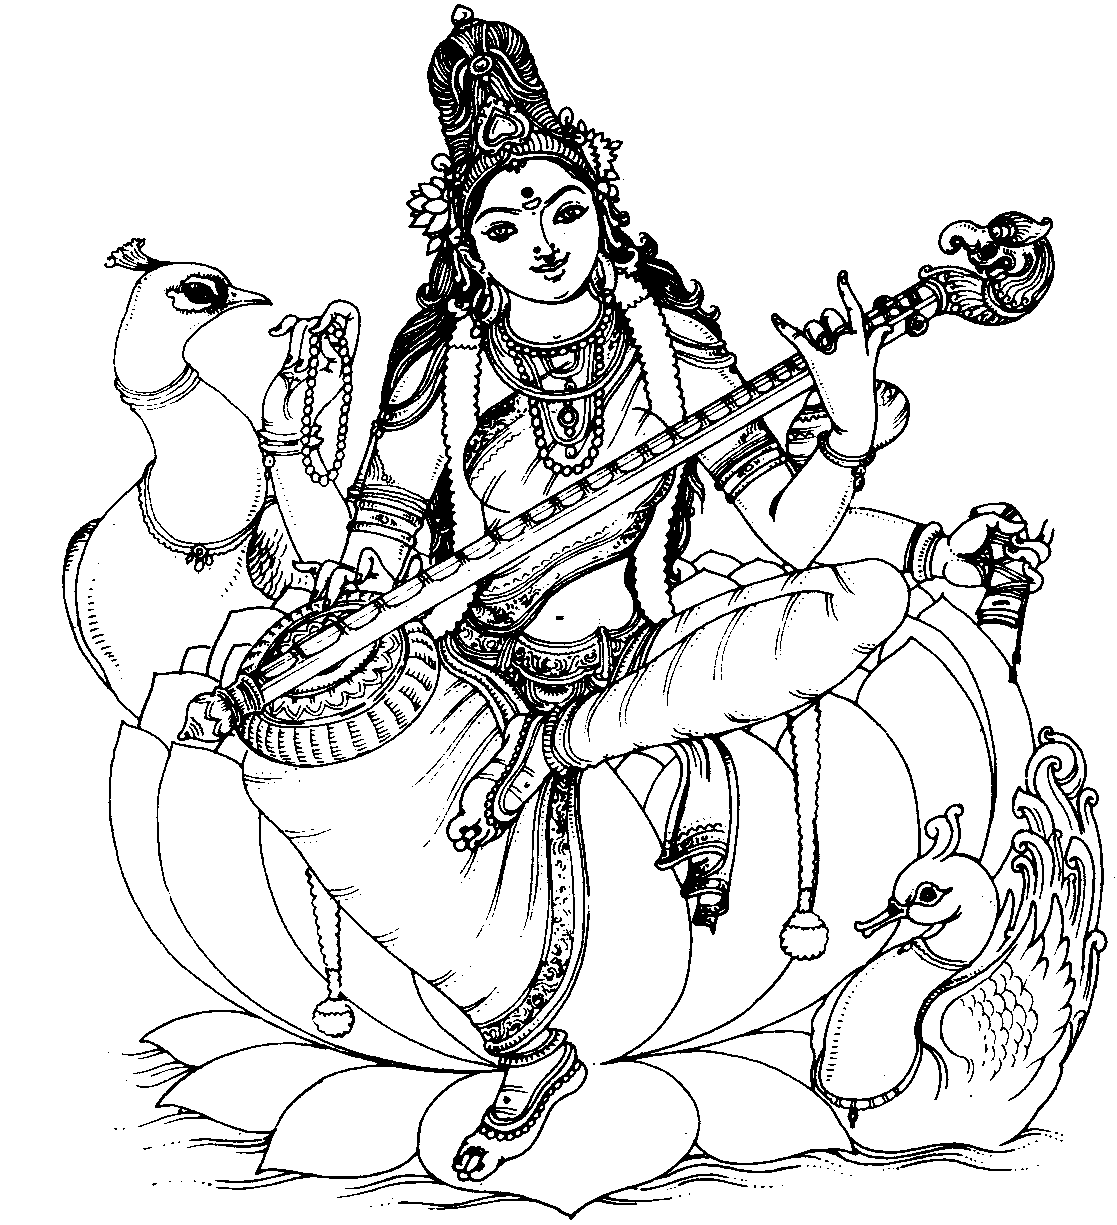 Coloring page: Hindu Mythology (Gods and Goddesses) #109261 - Printable coloring pages